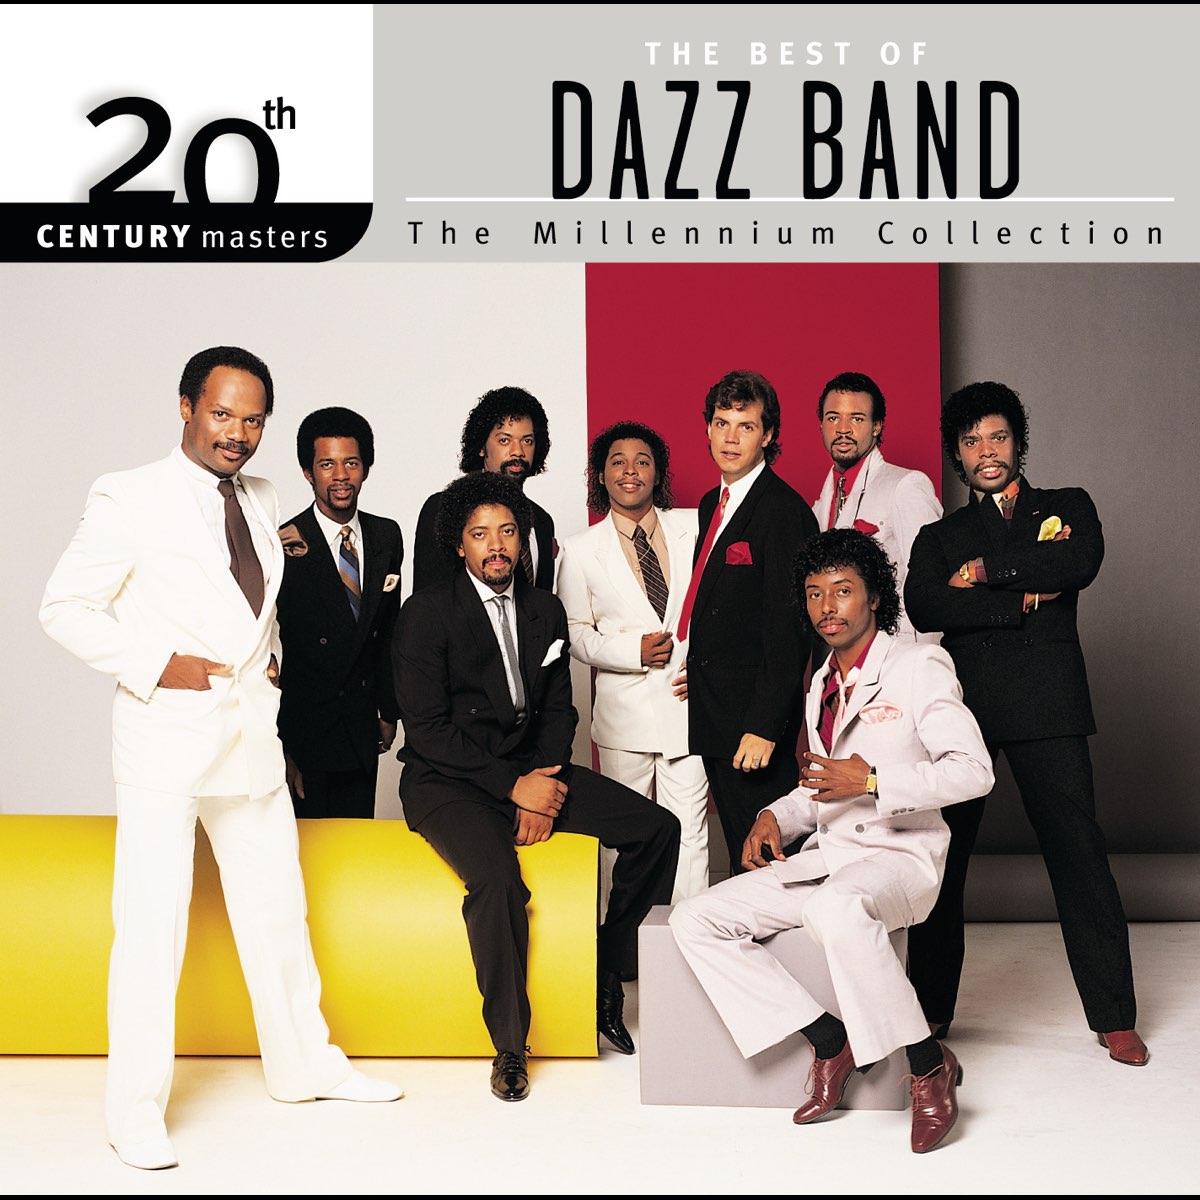 20th Century Masters - The Millennium Collection: The Best of Dazz